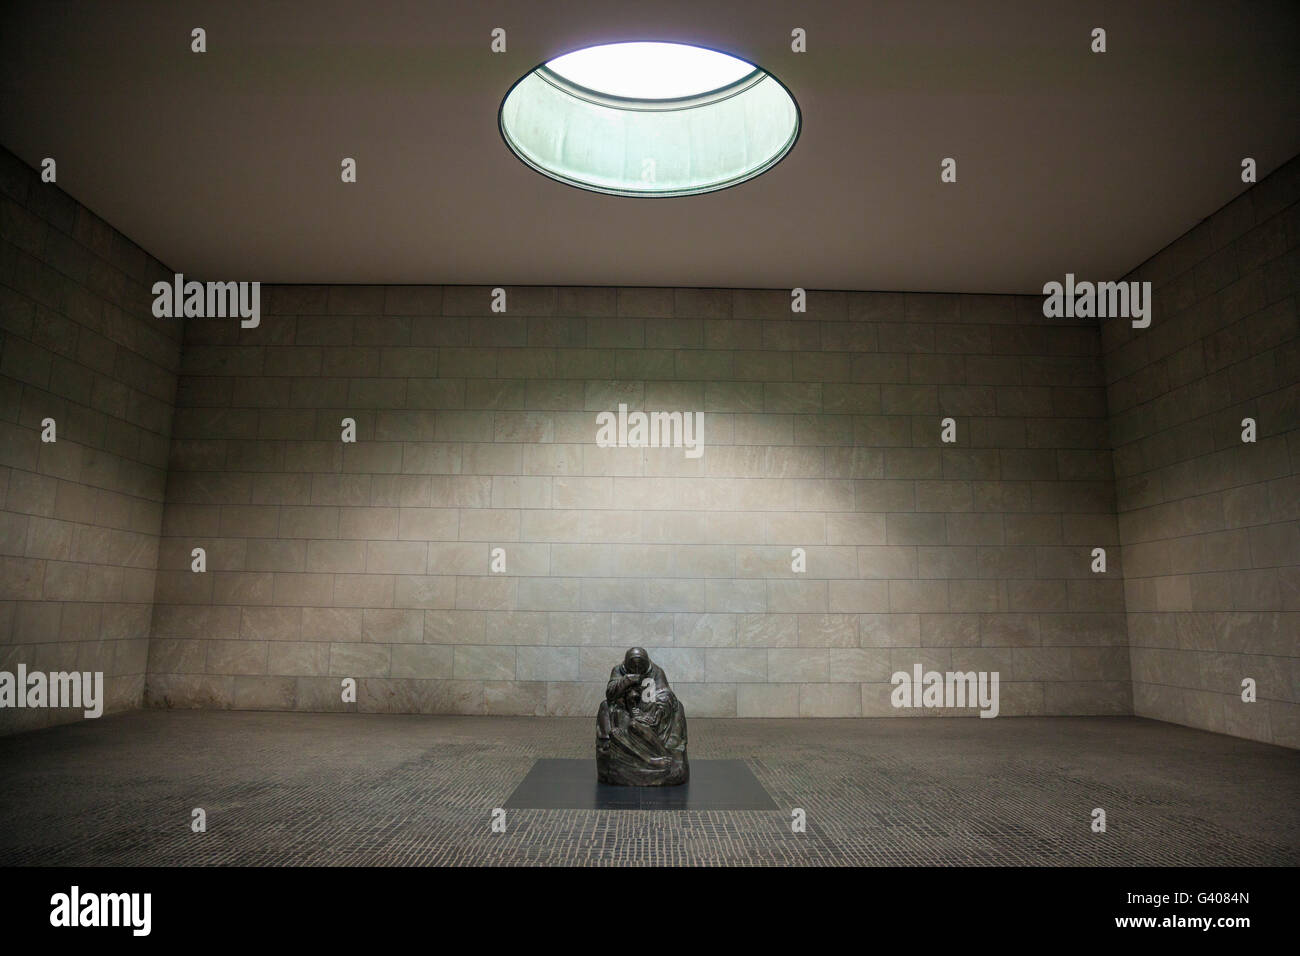 Memorial of the Federal Republic of Germany for war victims by kathe kollwitz Stock Photo